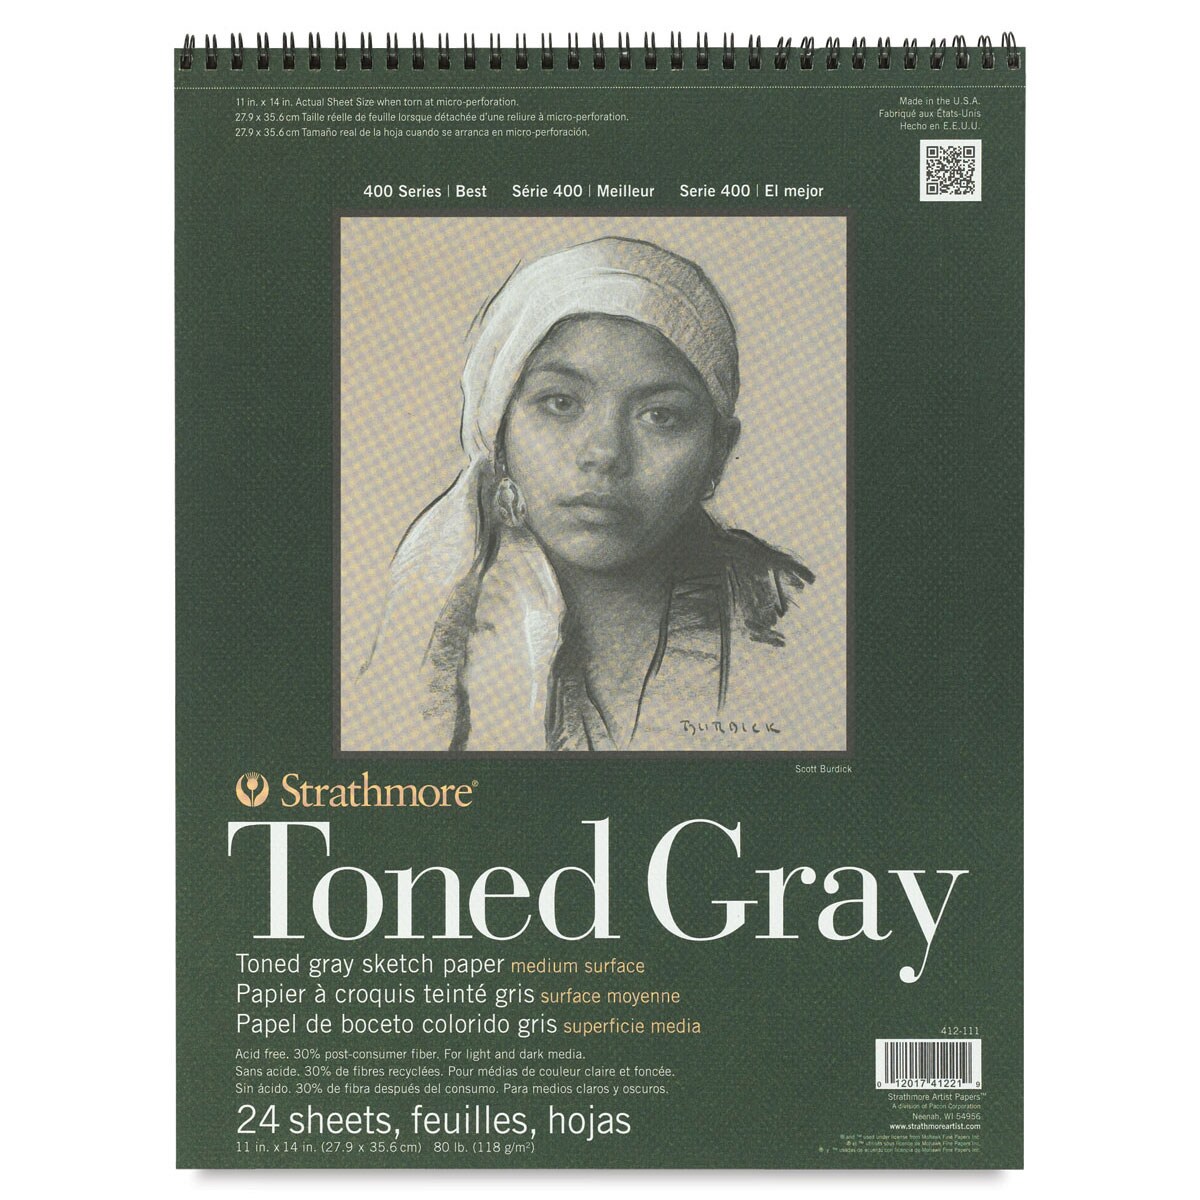 Strathmore Toned Gray Sketch Pad 11-Inch x 14-Inch, 24 Sheets